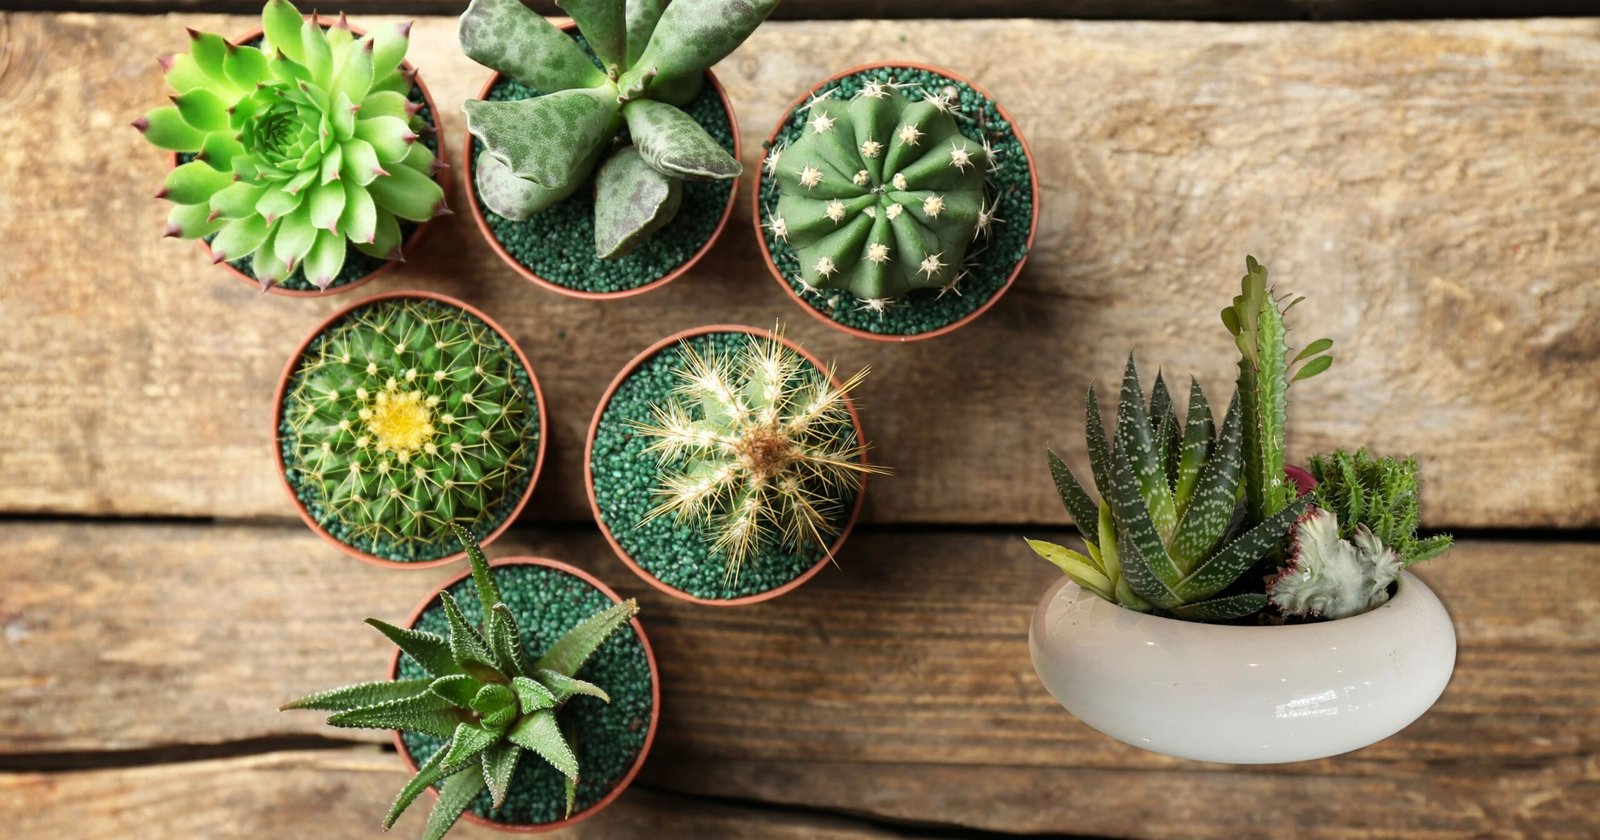 Are Succulents Poisonous To Humans